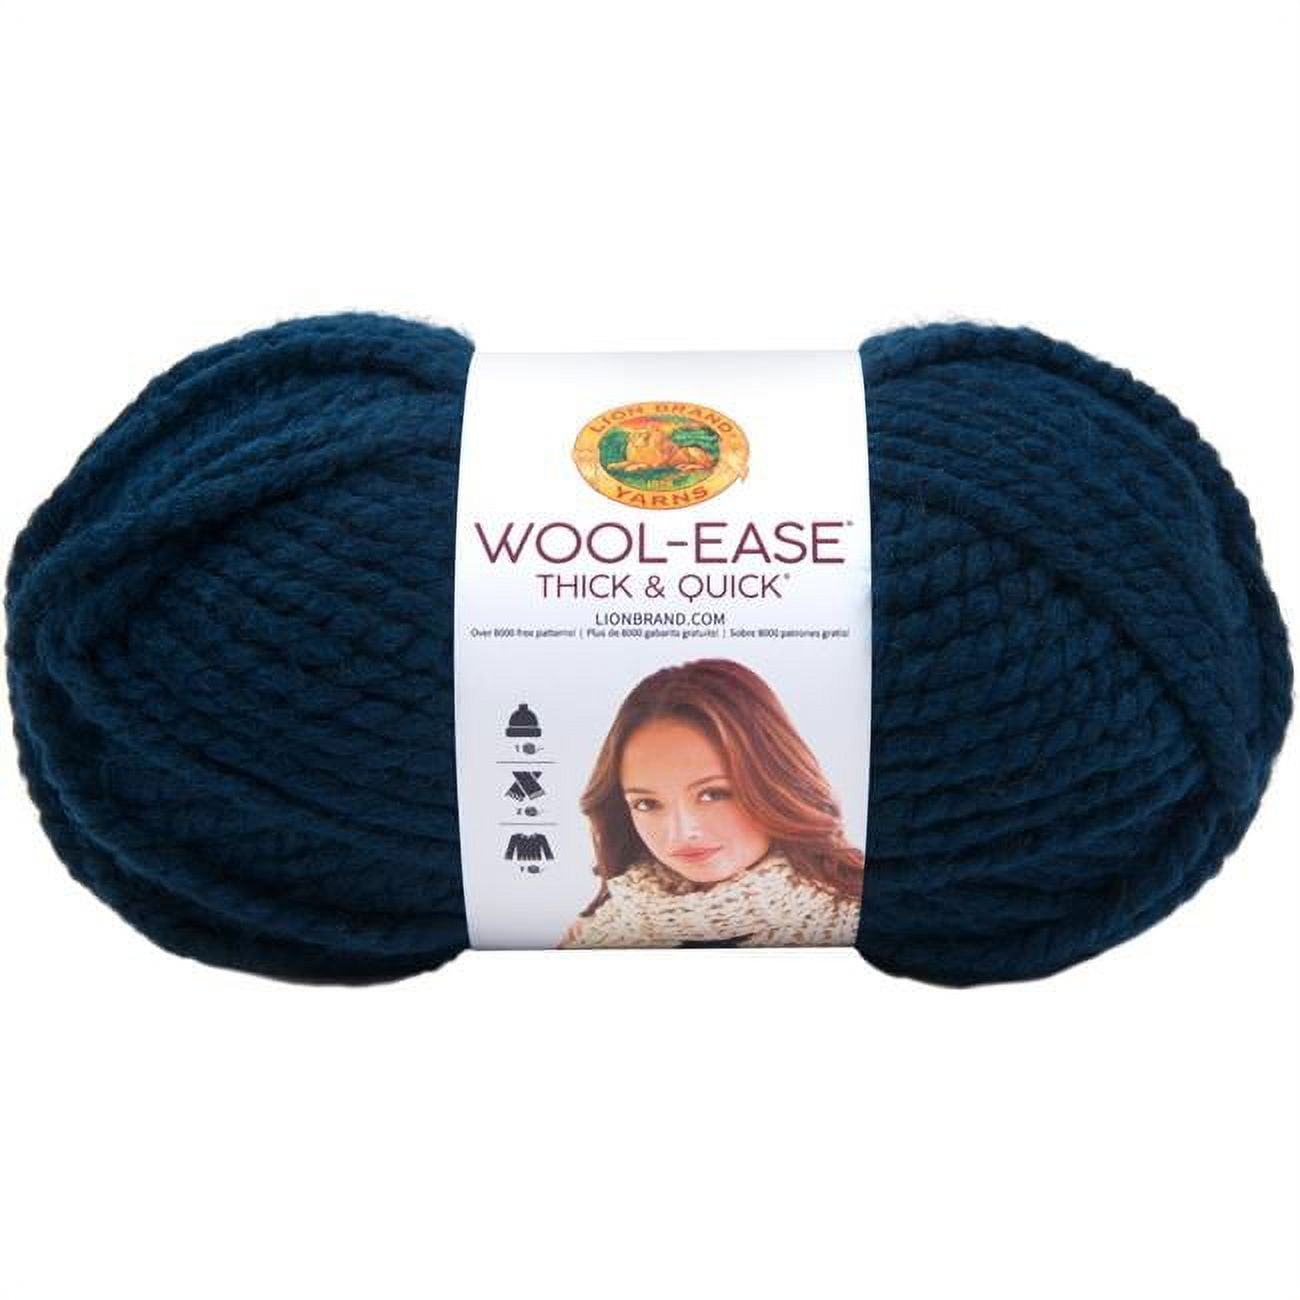 Lion Brand 640-622 Wool-Ease Thick & Quick Yarn, Harvest 